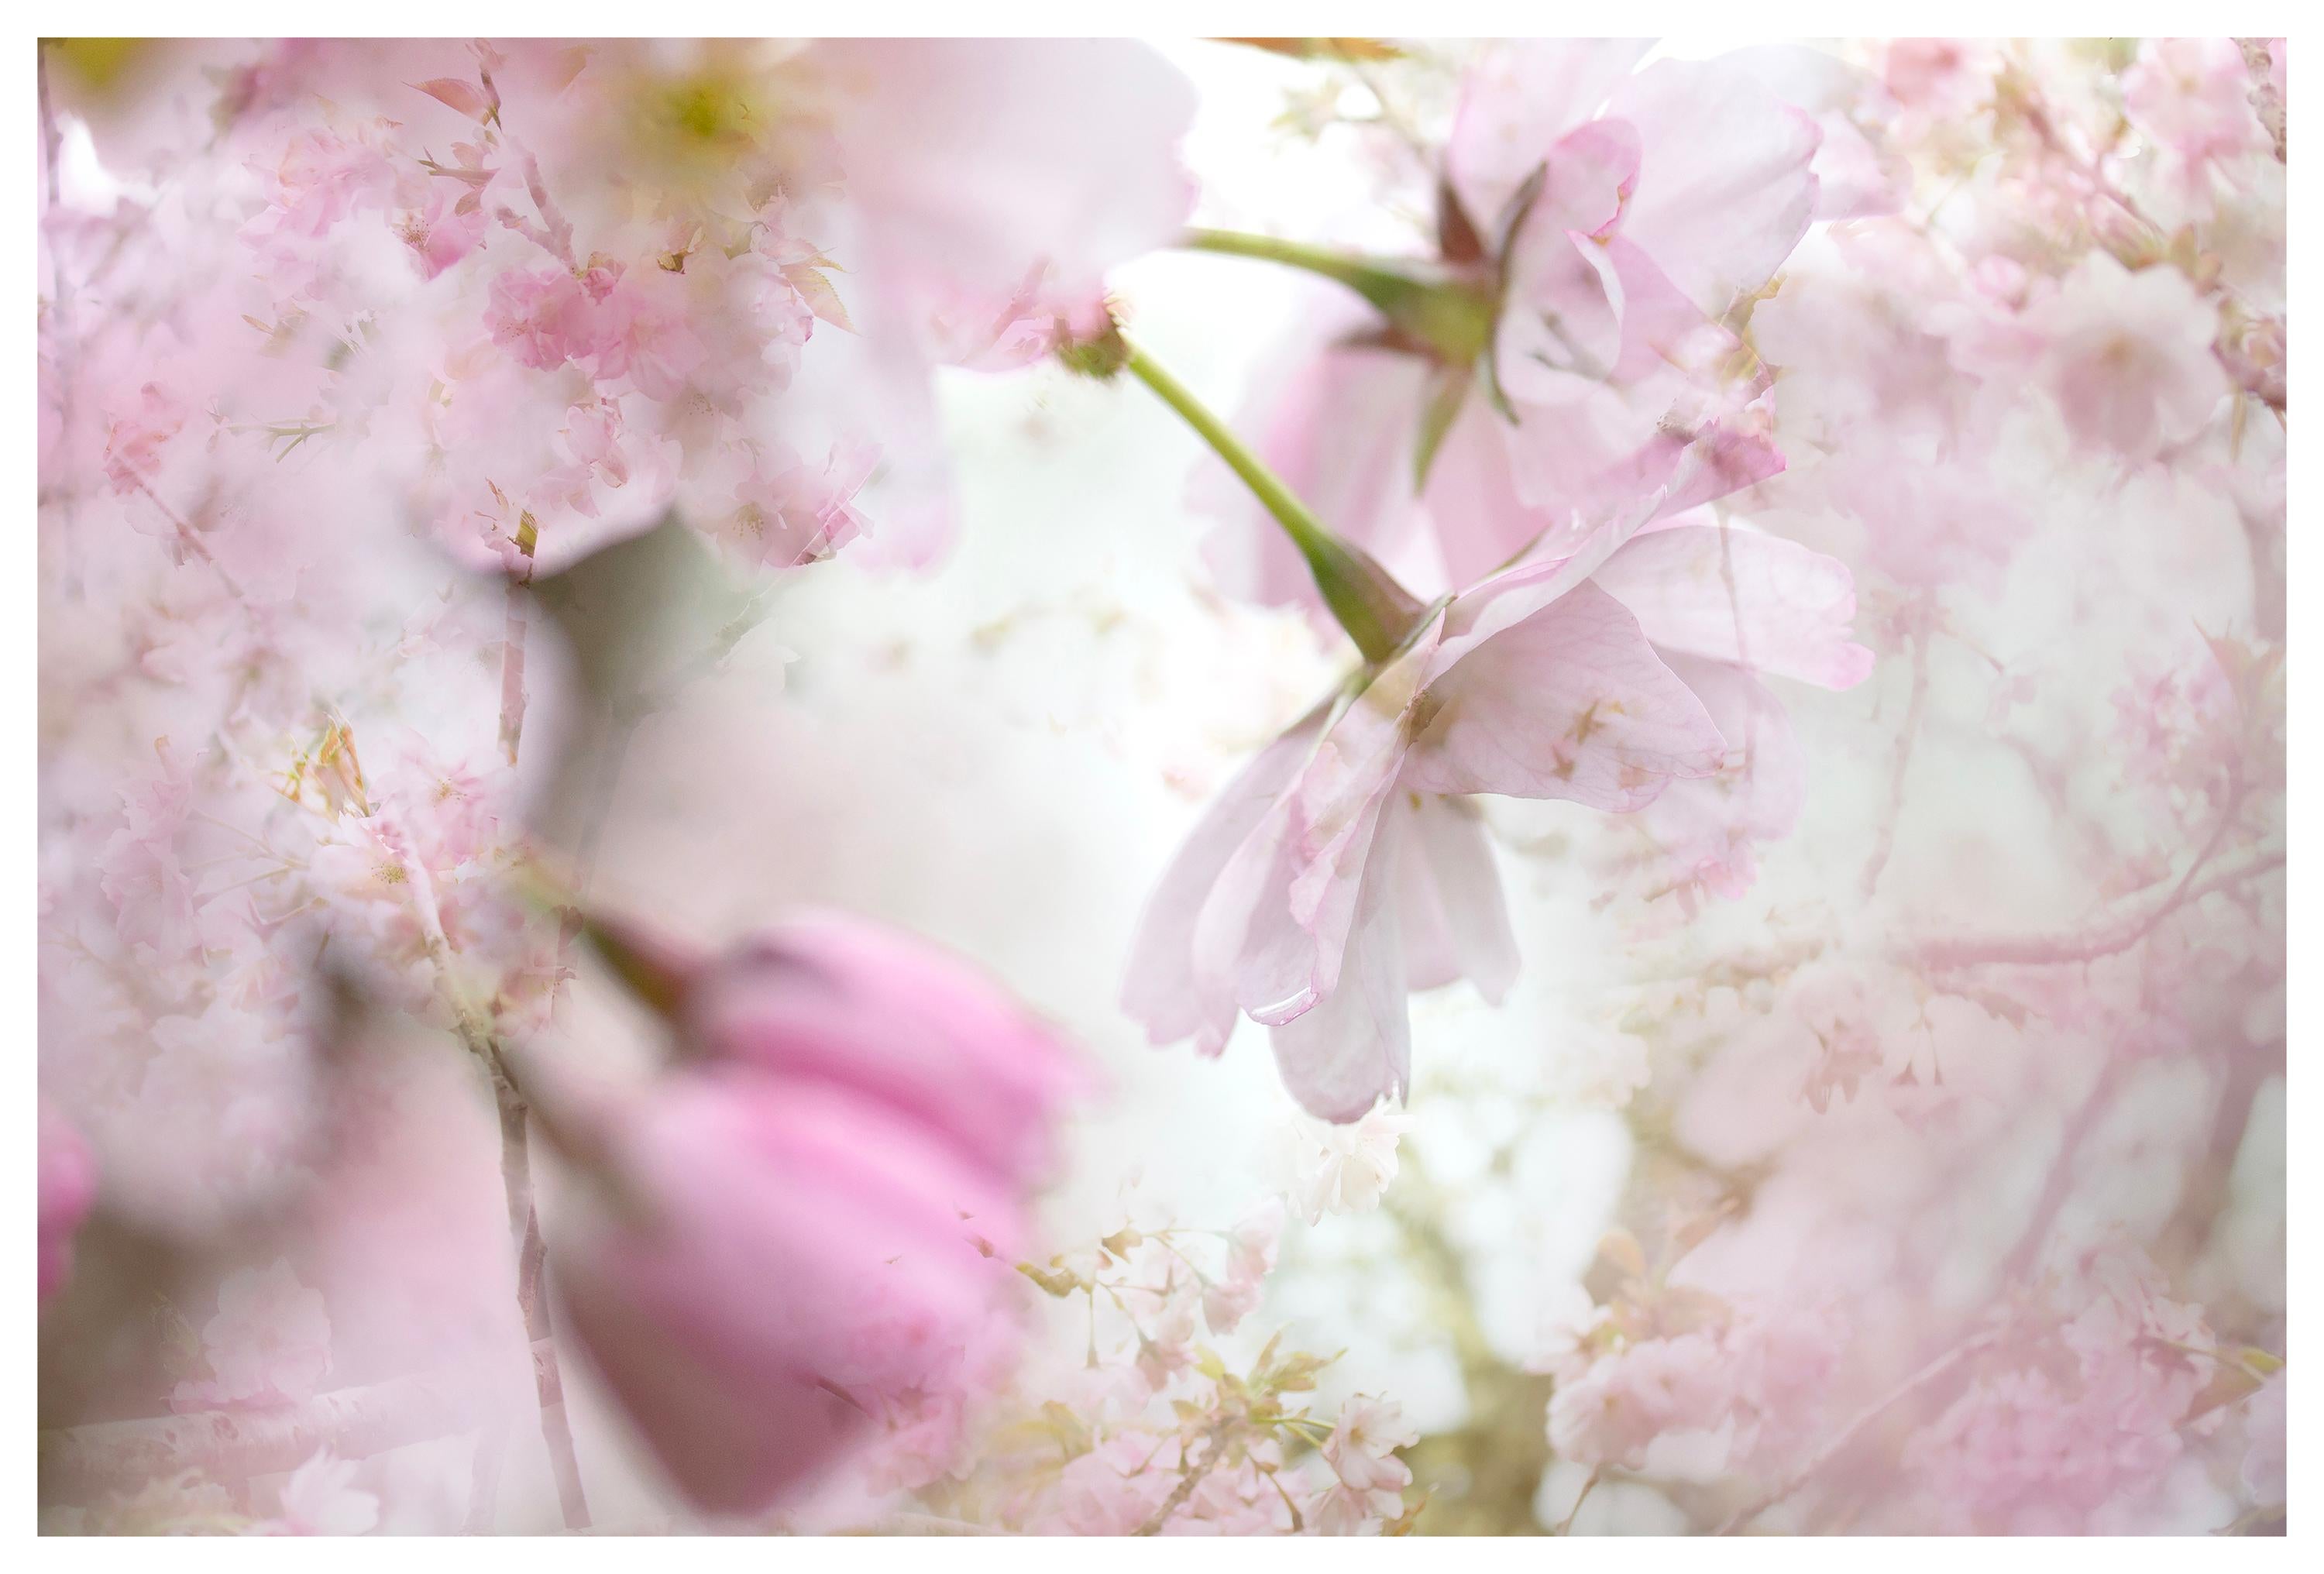 Sophia Milligan Abstract Photograph - 'Spring couplet' Photograph Cherry blossom Sakura flowers white pink nature